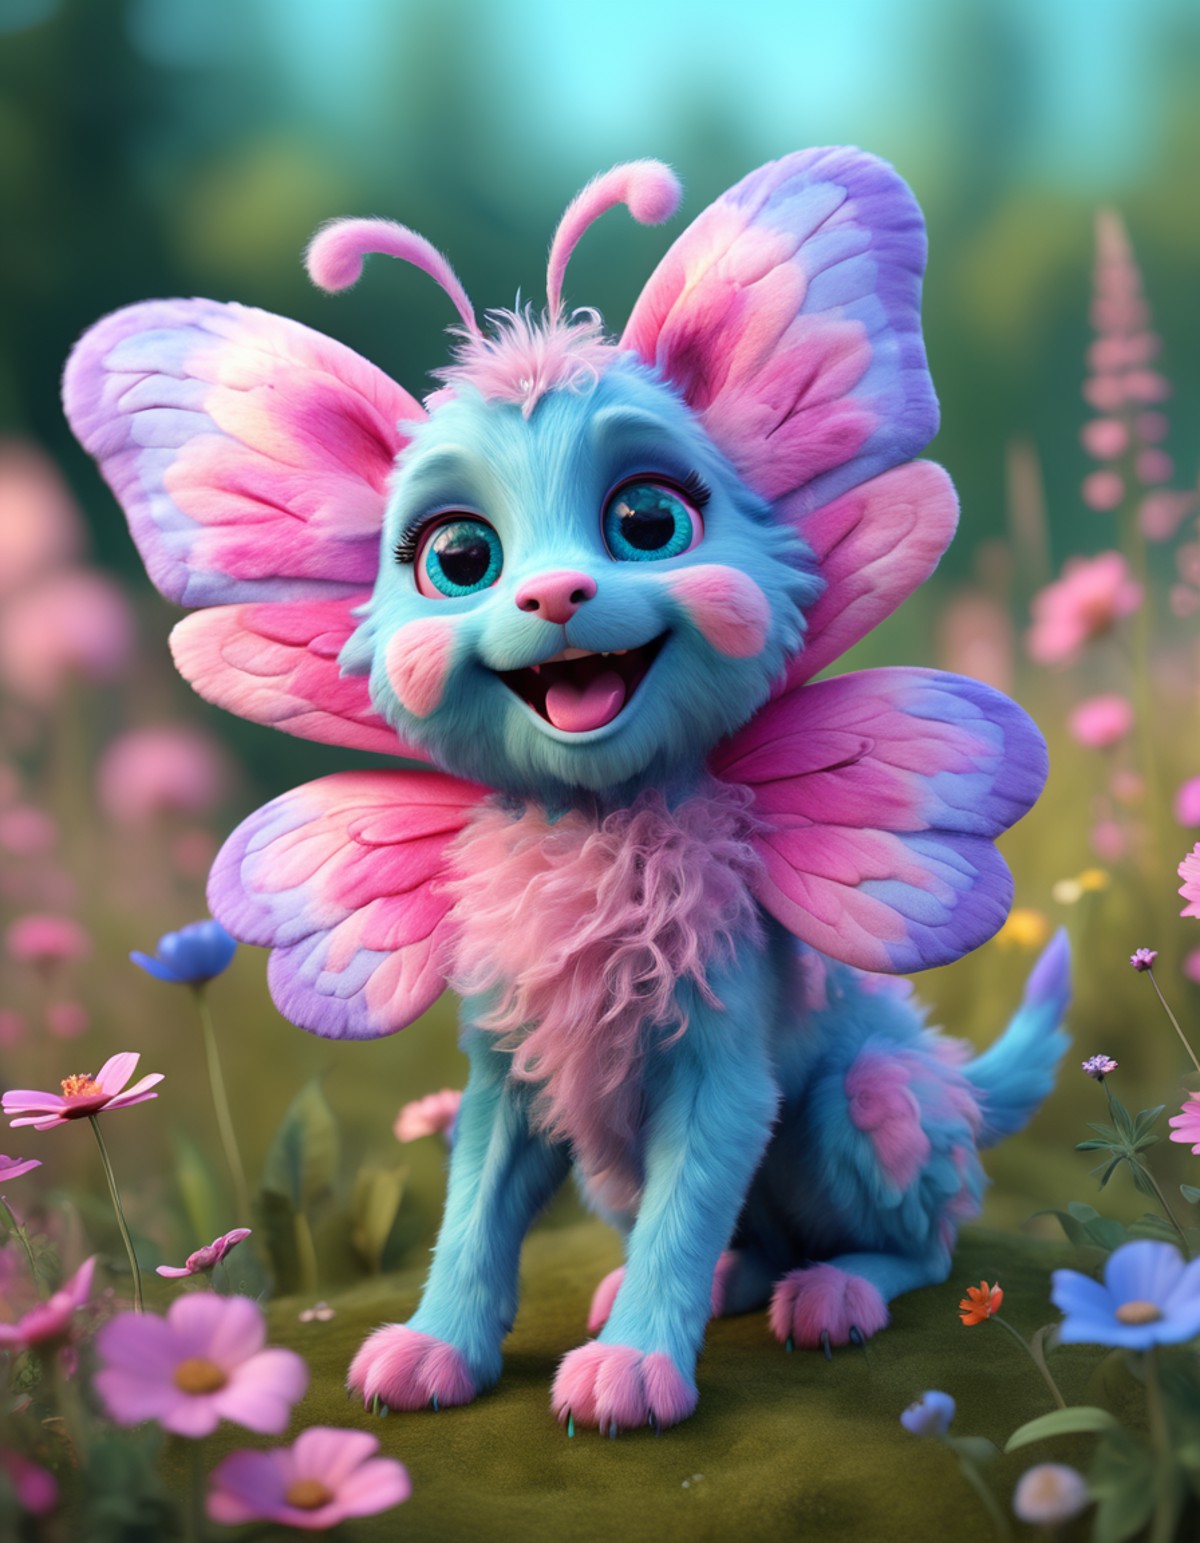 fantastical,  intricate,  vibrant 3D octane render of a playful and adorable creature with soft,  plushy fur in various sh...